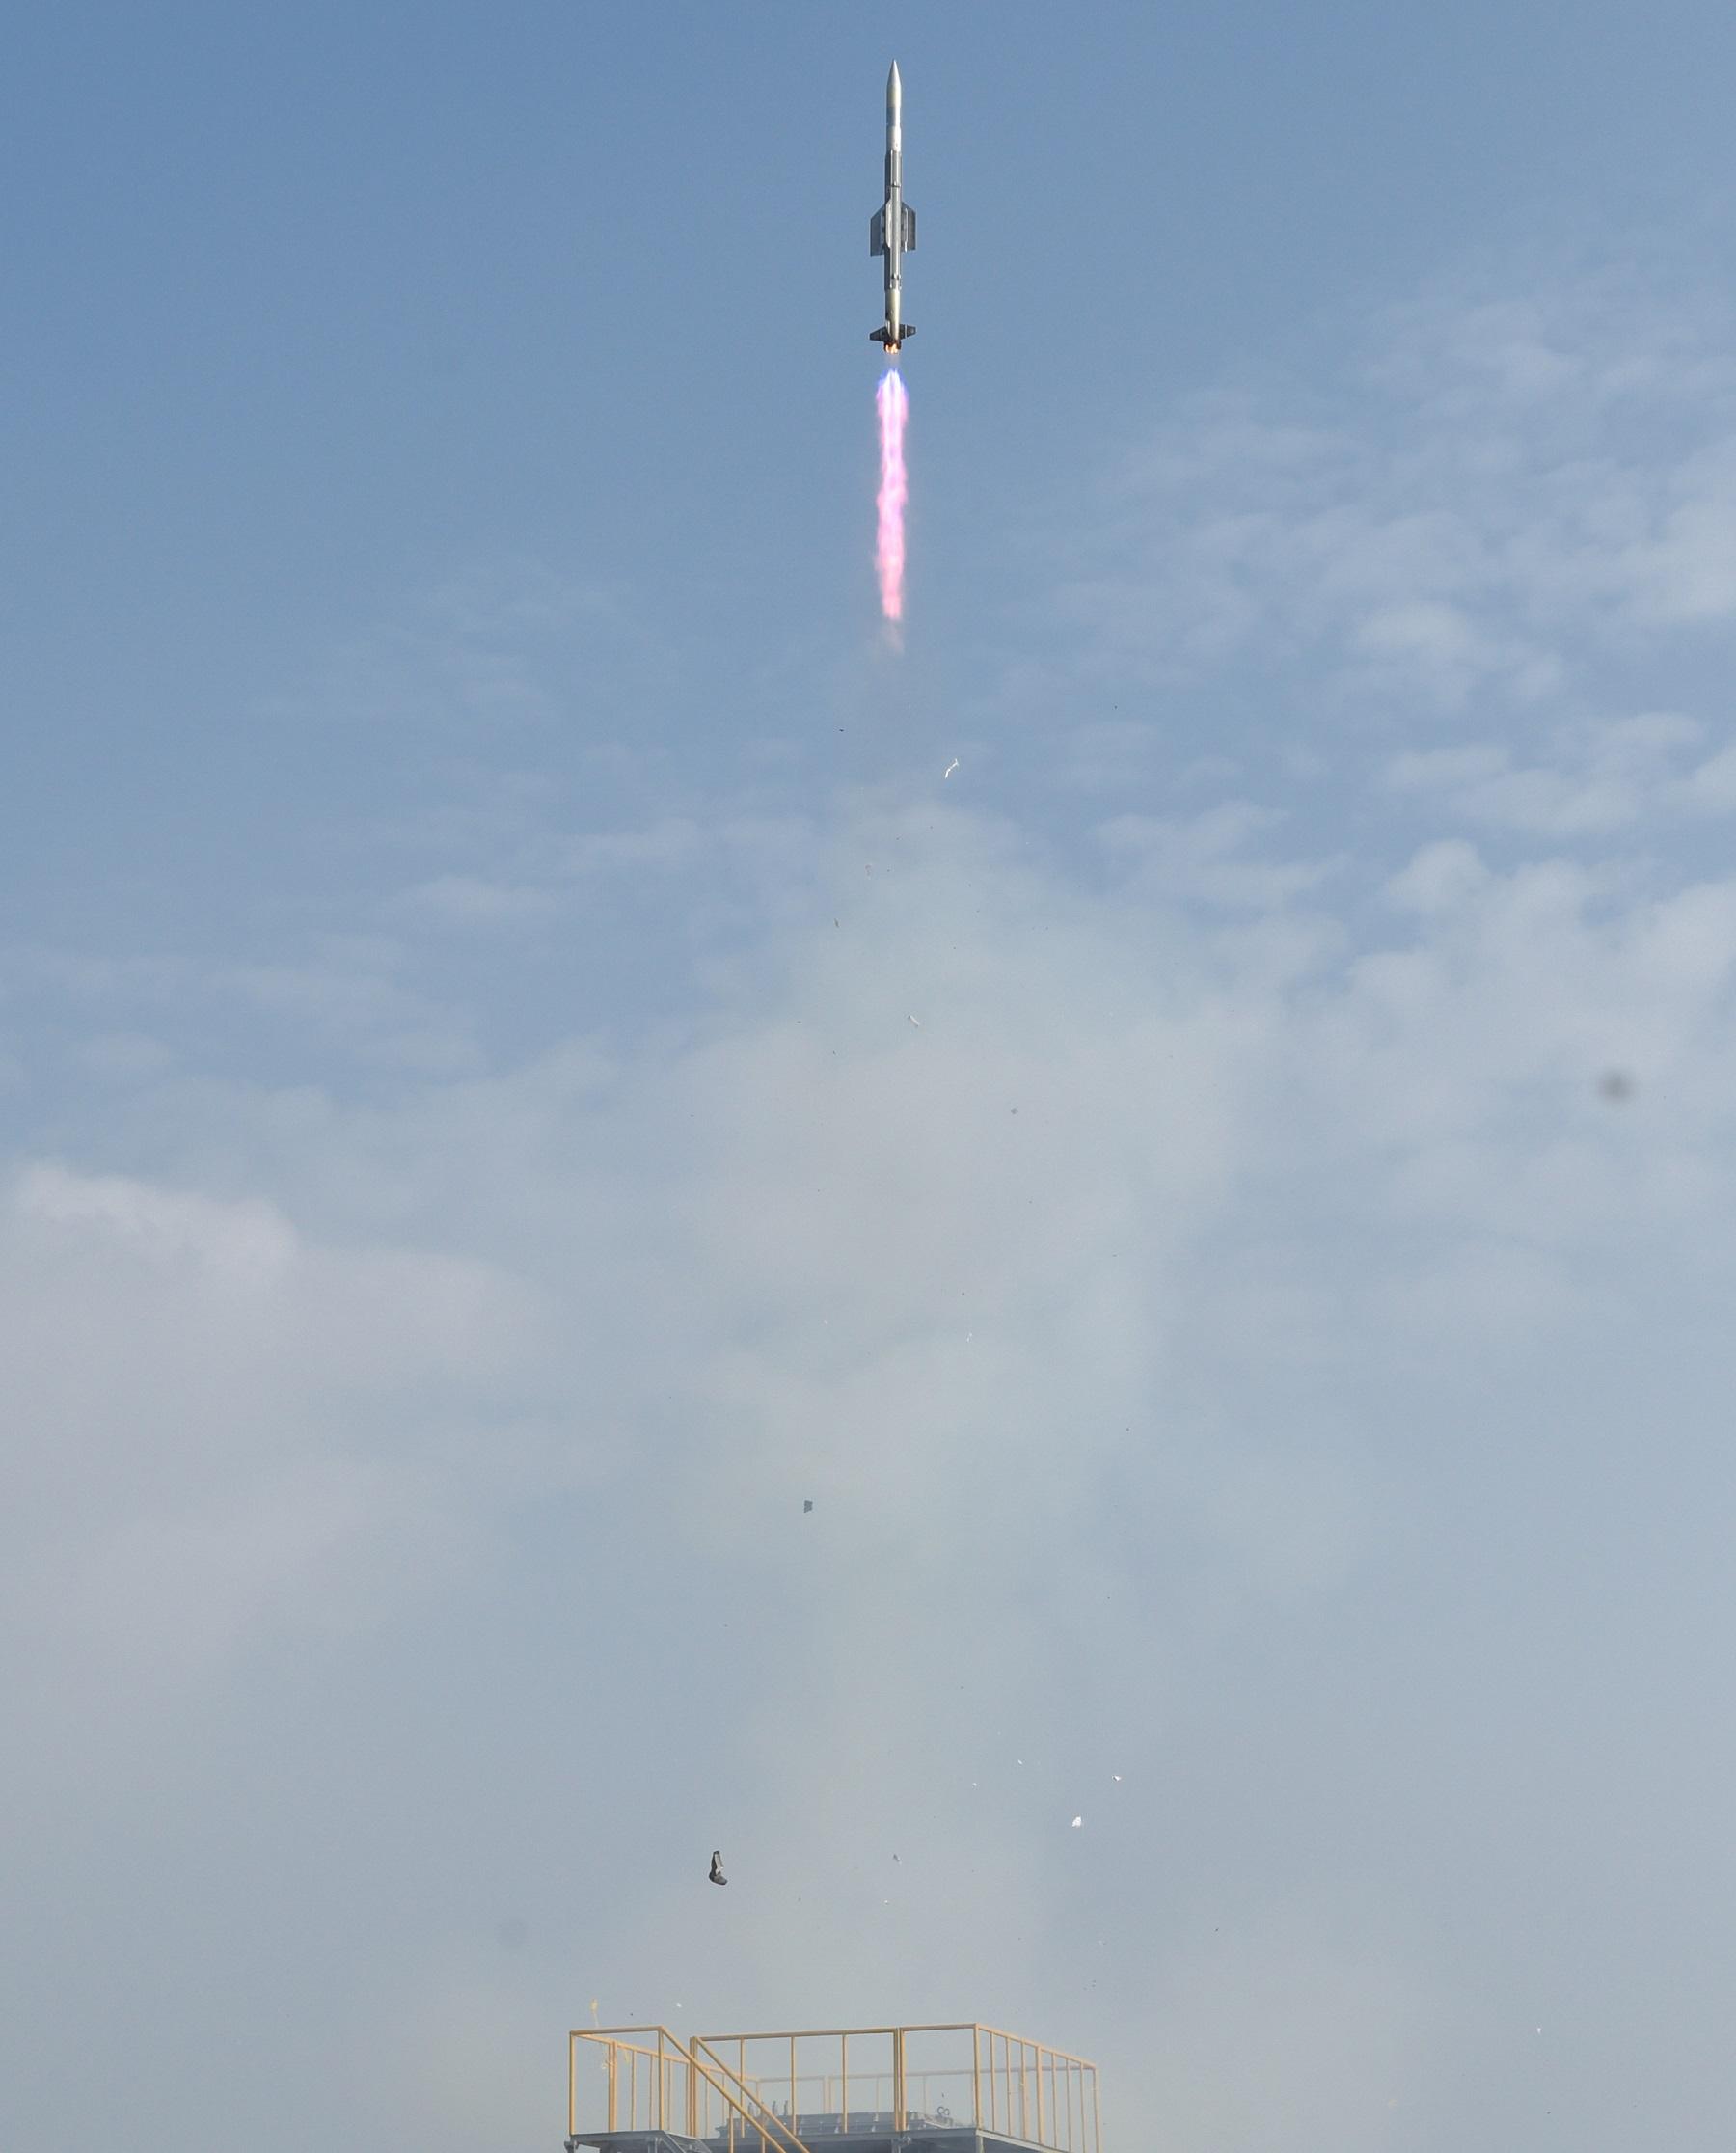 Vertical Launch Short Range Surface to Air Missile launched to validate integrated operation of weapon system components including the vertical launcher with controller, canisterised flight vehicle and weapon control system. 